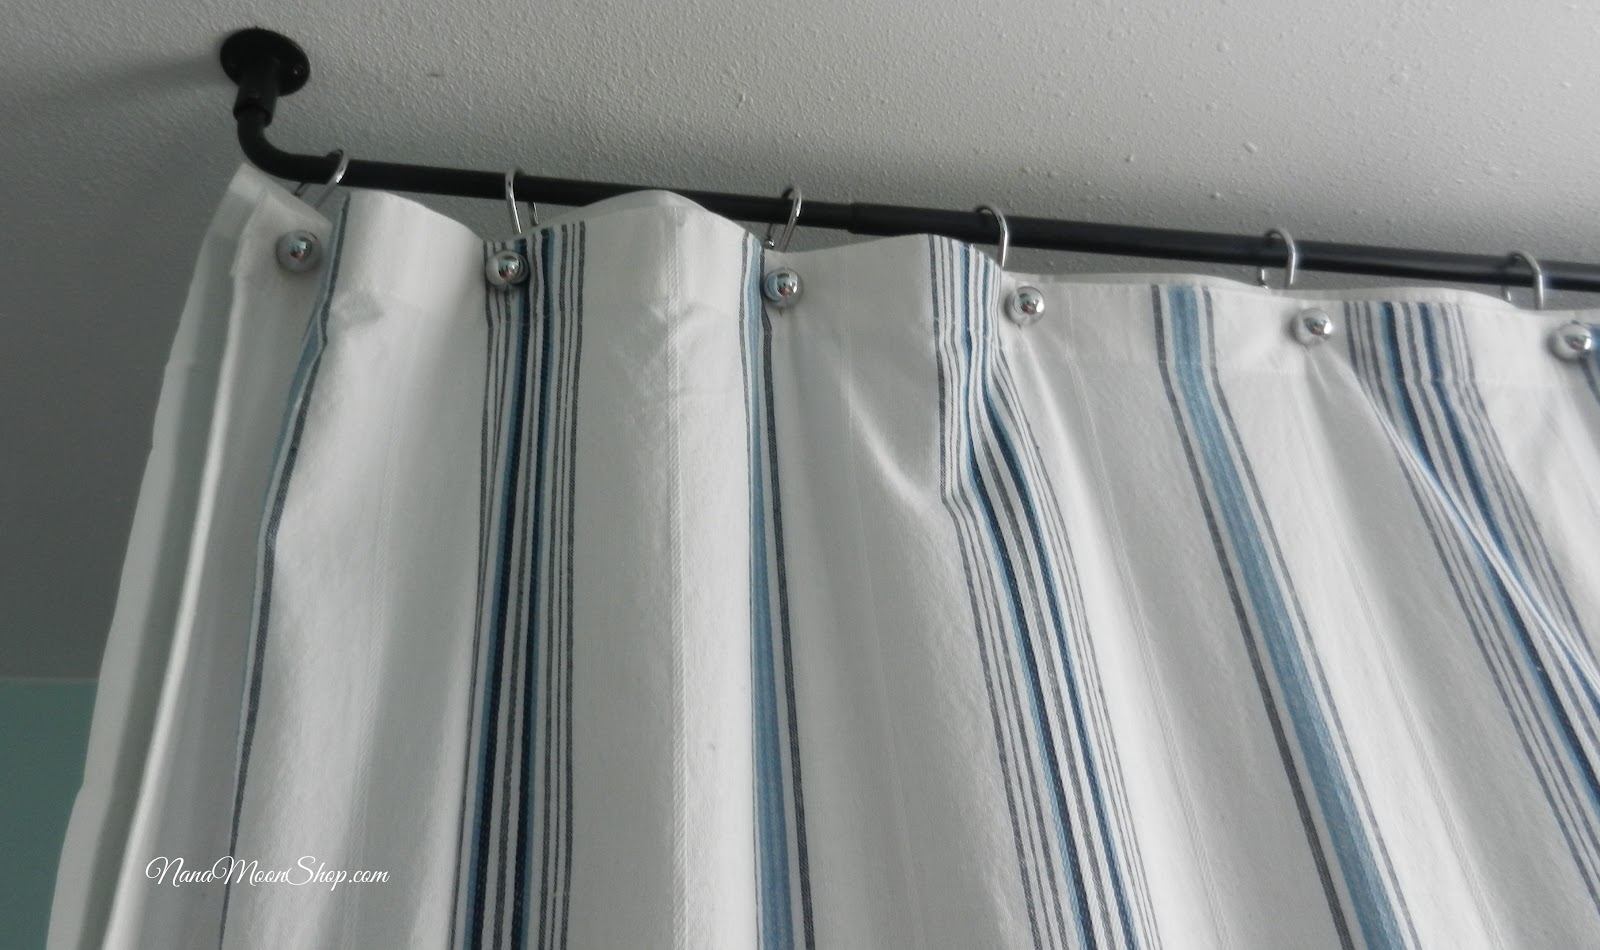 Curtain Rods That Attach To Side Wall Vases That Hang From Ceiling